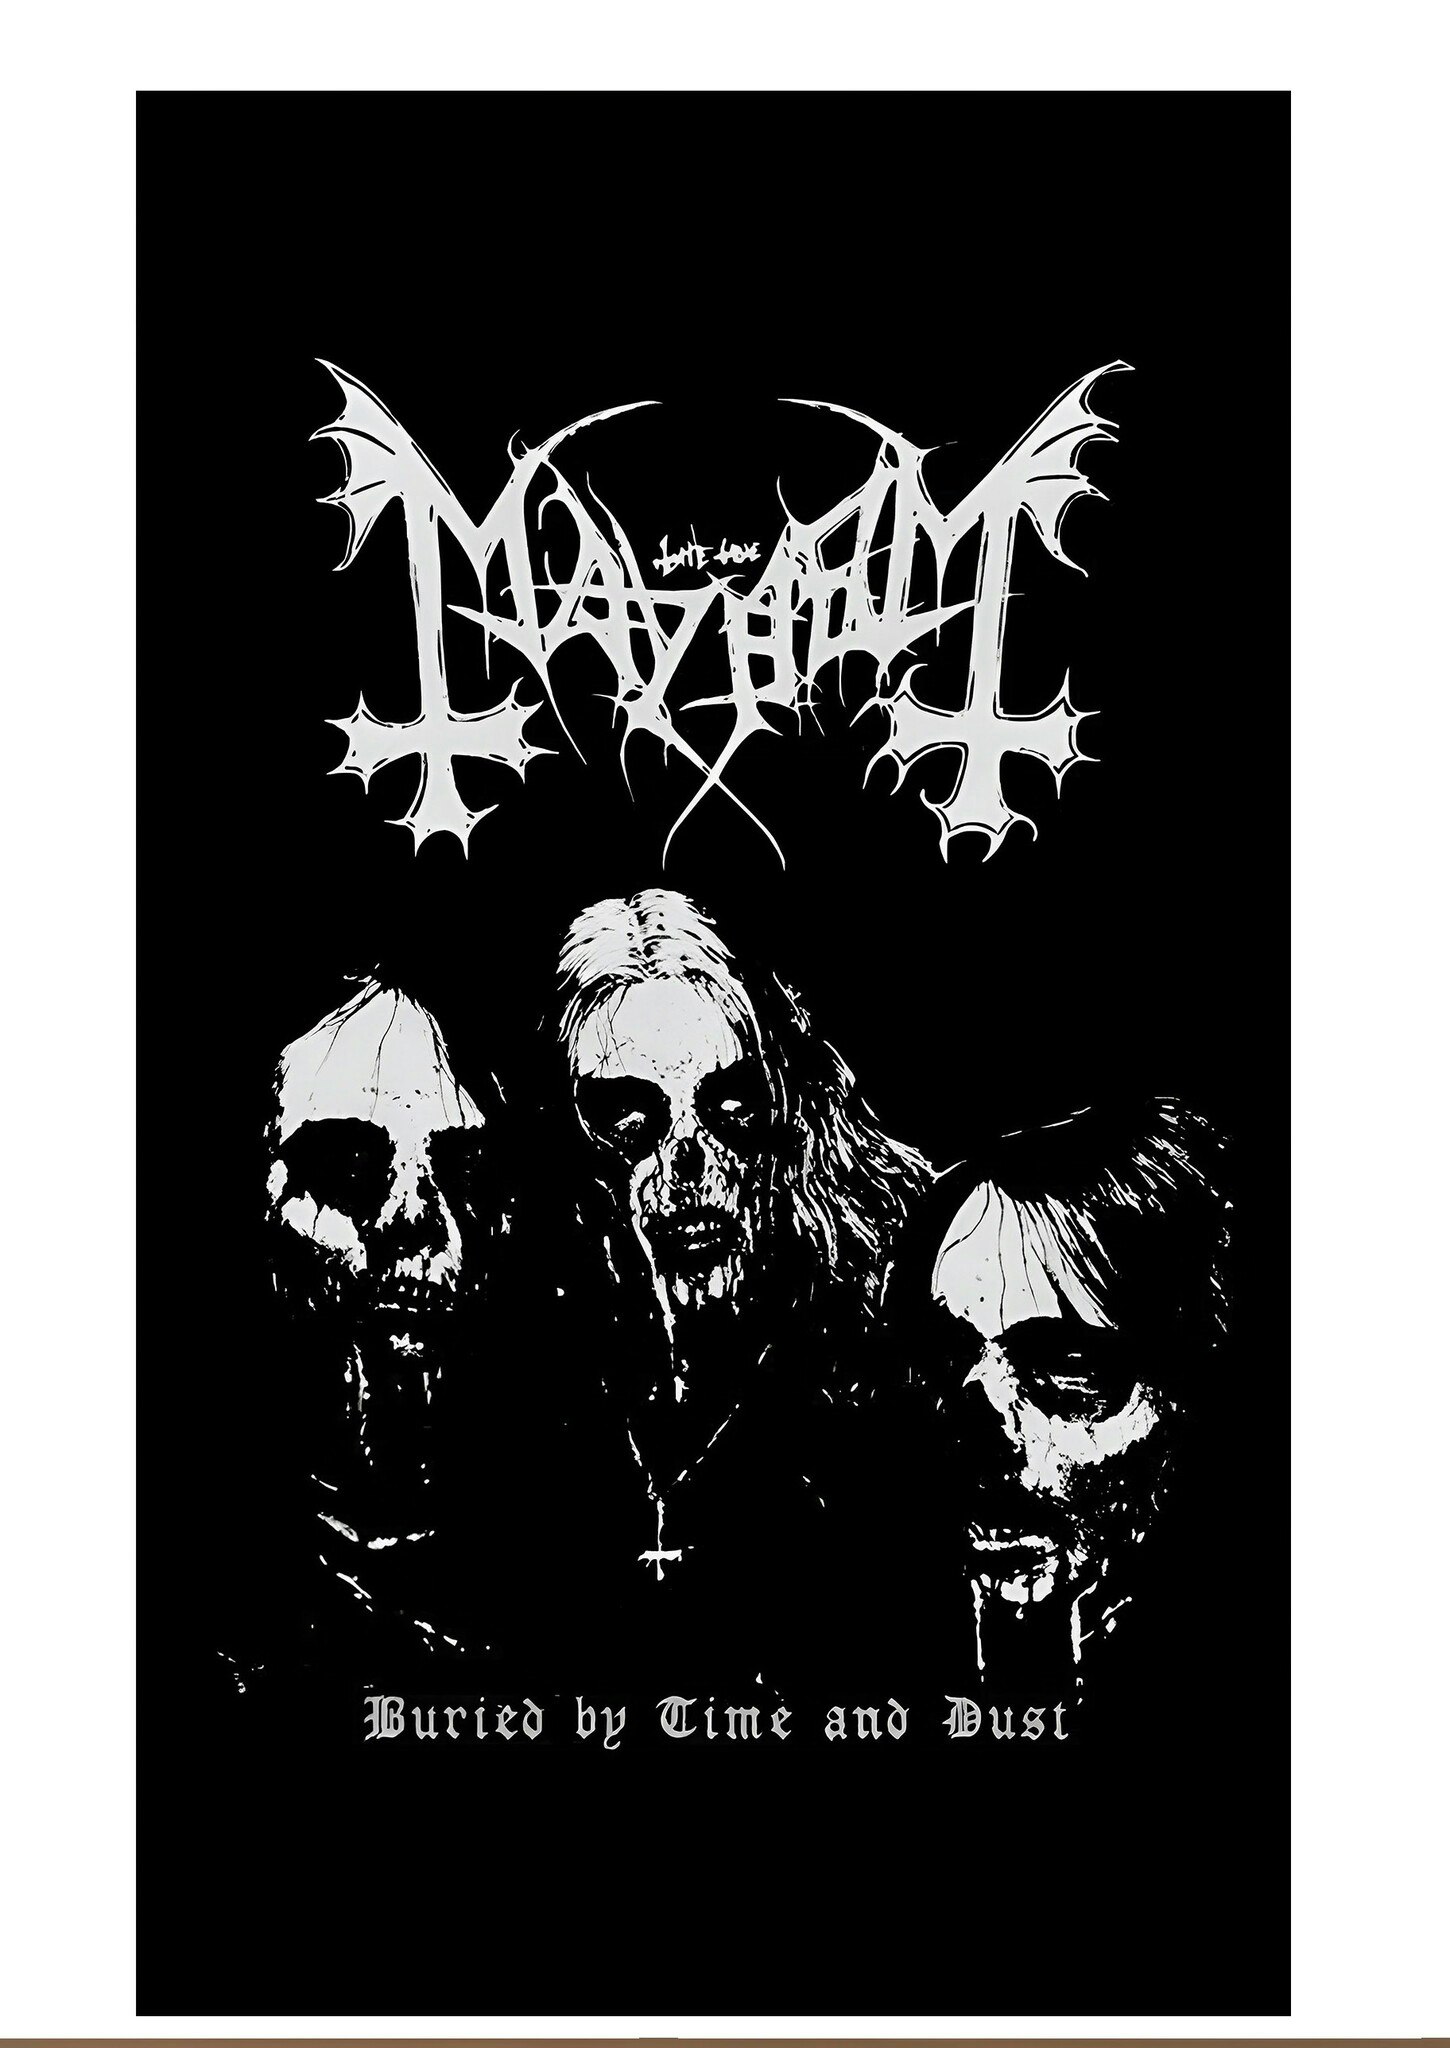 Mayhem "Buried by time and dust" posterflag